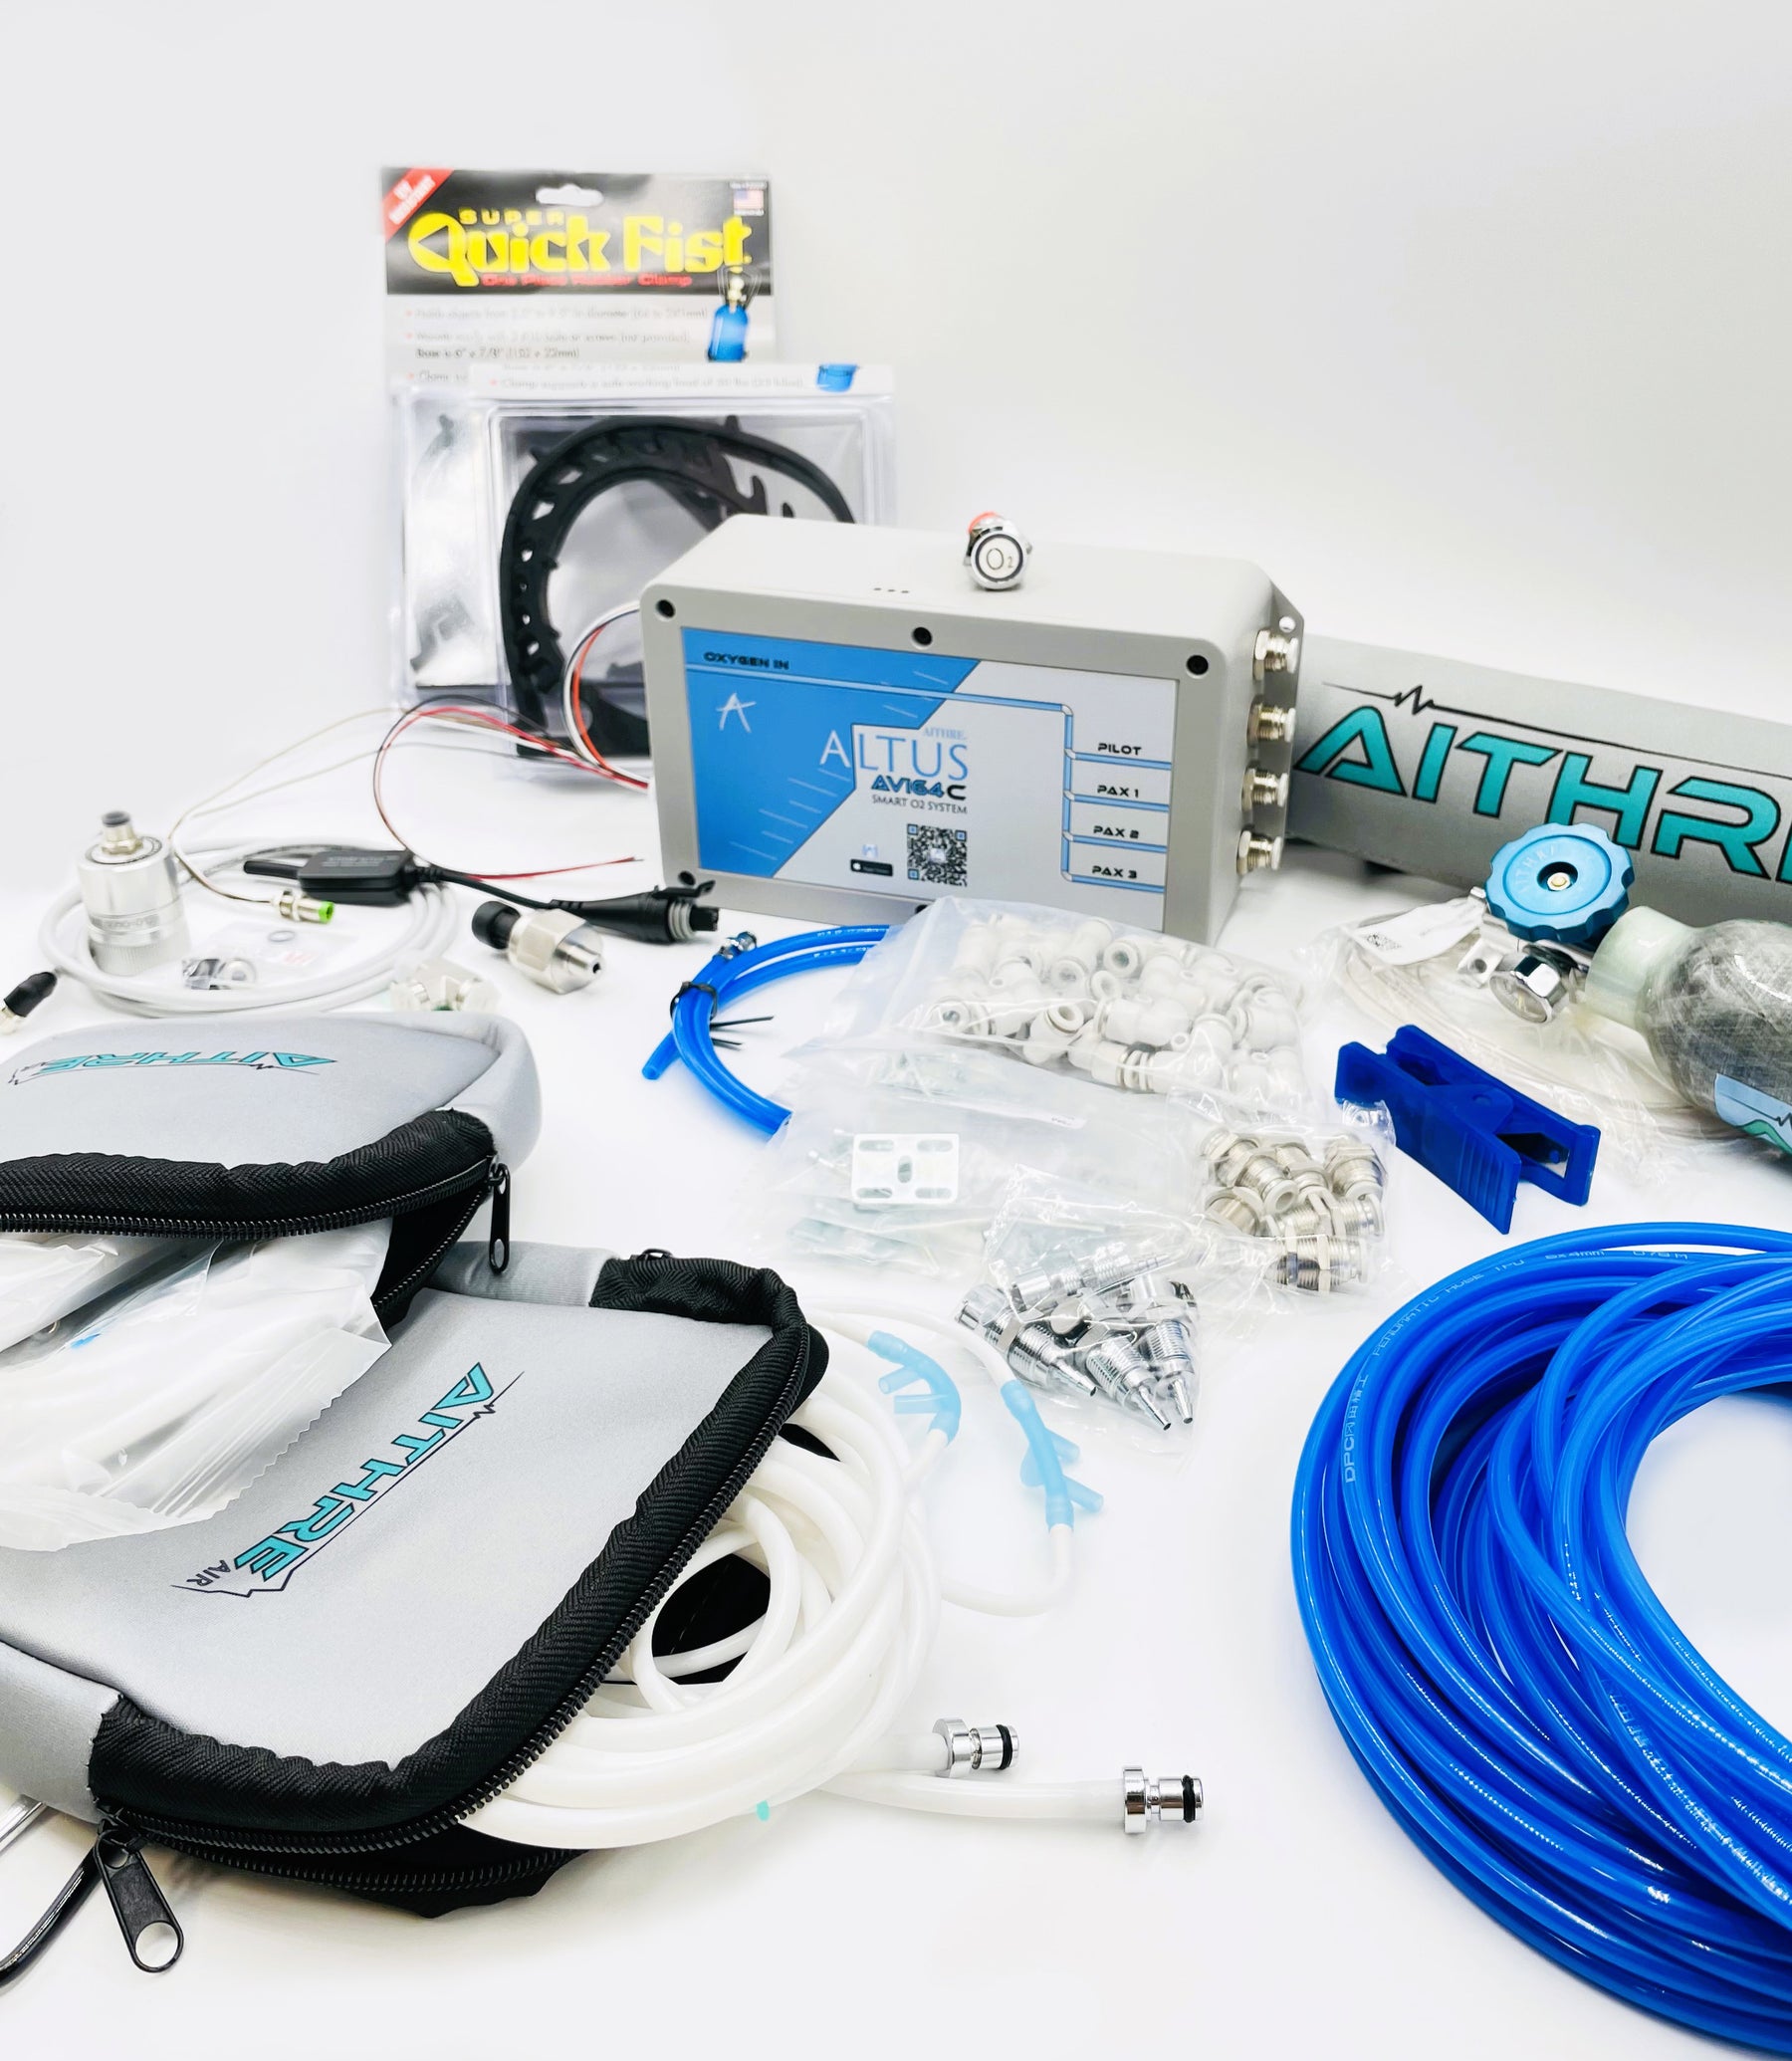 AVI64C 4-Place Smart Oxygen Systems for Certified Aircraft